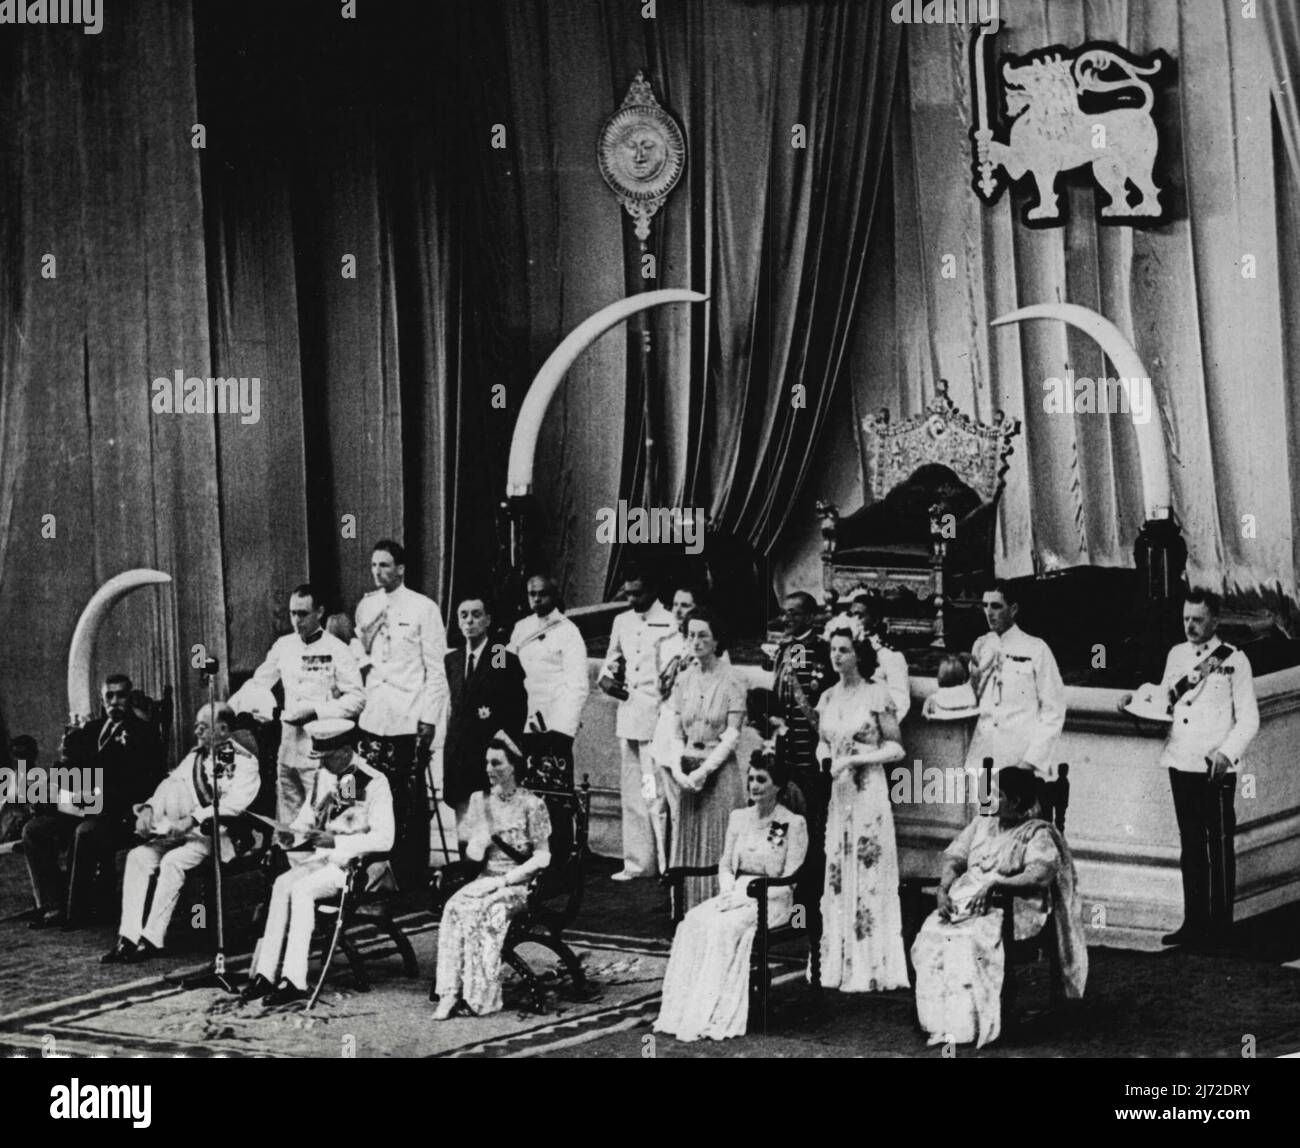 Ceylon Gains Independence -- (Seated, left to right) D.S. Senanayake, Prime Minister of Ceylon; Sir Henry Moore, Governor General of Ceylon; The Duke of Gloucester; The Duchess of Gloucester; Lady Moore and Mrs. D.S. Senanayake seen in the Assembly Hall, Colombo Feb. 10, when the Duke of Gloucester inaugurated the dominion of Ceylon Parliament. Behind them is the Red and Gold Throne of Ceylon's Kandian Kings. February 26, 1948. (Photo by Associated Press Photo). Stock Photo